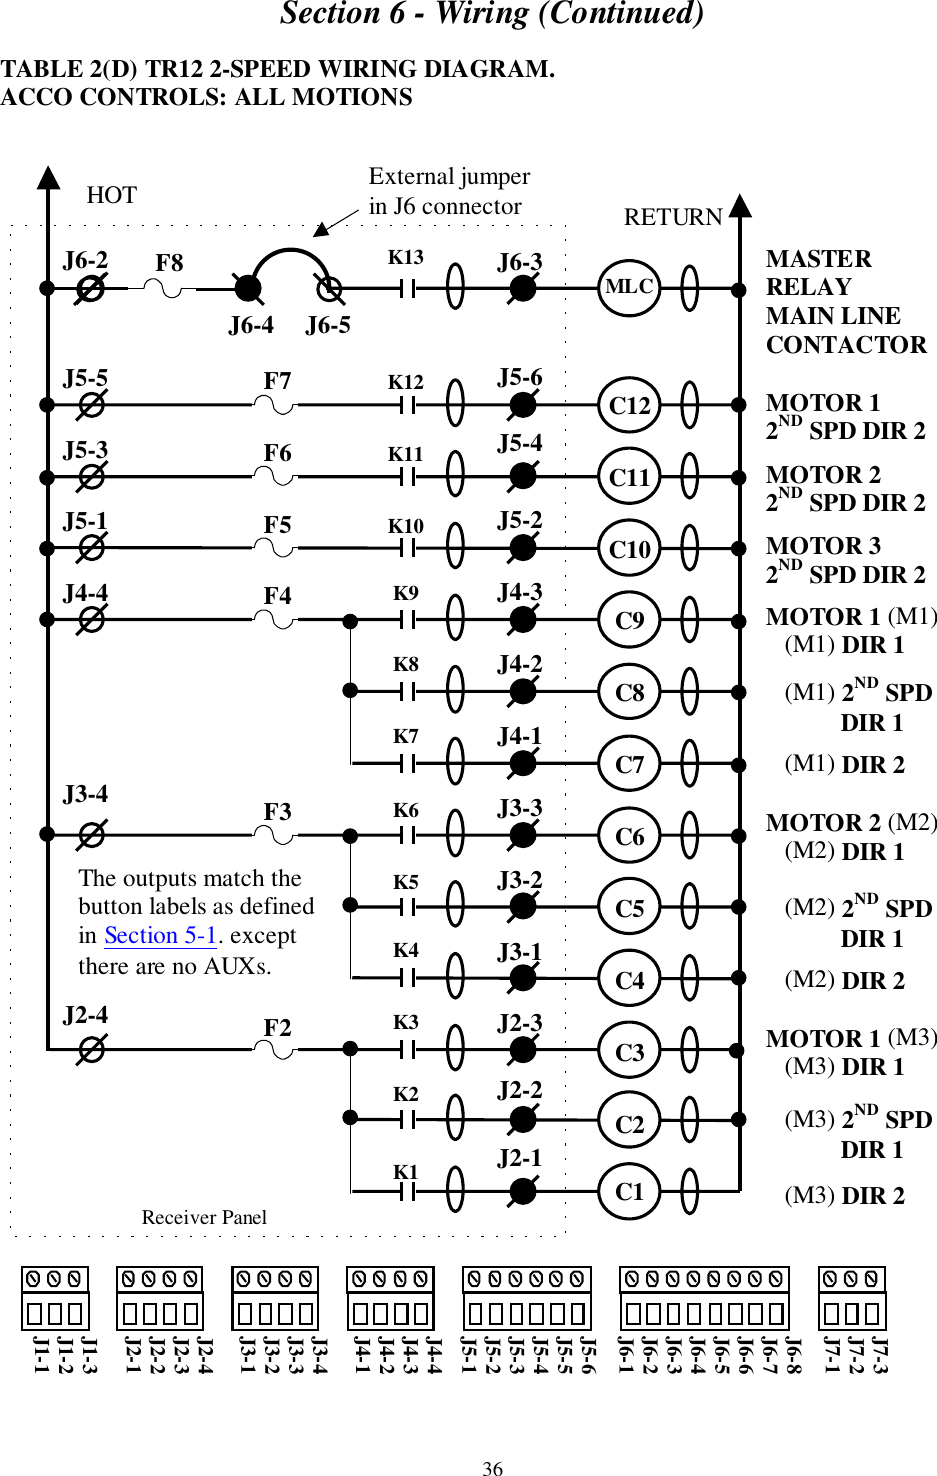 Section 6 - Wiring (Continued)36TABLE 2(D) TR12 2-SPEED WIRING DIAGRAM.ACCO CONTROLS: ALL MOTIONSMASTERRELAYMAIN LINECONTACTORMOTOR 12ND SPD DIR 2MOTOR 22ND SPD DIR 2MOTOR 32ND SPD DIR 2MOTOR 1 (M1)   (M1) DIR 1   (M1) 2ND SPD            DIR 1   (M1) DIR 2MOTOR 2 (M2)   (M2) DIR 1   (M2) 2ND SPD            DIR 1   (M2) DIR 2MOTOR 1 (M3)   (M3) DIR 1   (M3) 2ND SPD            DIR 1   (M3) DIR 2     Receiver PanelJ6-2J5-5J5-3J5-1J4-4J3-4J2-4J6-3J5-6J5-4J5-2J4-3J4-2J4-1J3-3J3-2J3-1J2-3J2-2J2-1HOT RETURNK13K12K11K10K9K8K7K6K5K4K3K2K1MLCC12C11C10C9C8C7C6C5C4C3C2C1F7F6F5F4F3F2J7-3J7-2J7-1J6-8J6-7J6-6J6-5J6-4J6-3J6-2J6-1J5-6J5-5J5-4J5-3J5-2J5-1J4-4J4-3J4-2J4-1J3-4J3-3J3-2J3-1J2-4J2-3J2-2J2-1J1-3J1-2J1-1External jumperin J6 connectorJ6-4     J6-5F8The outputs match thebutton labels as definedin Section 5-1. exceptthere are no AUXs.